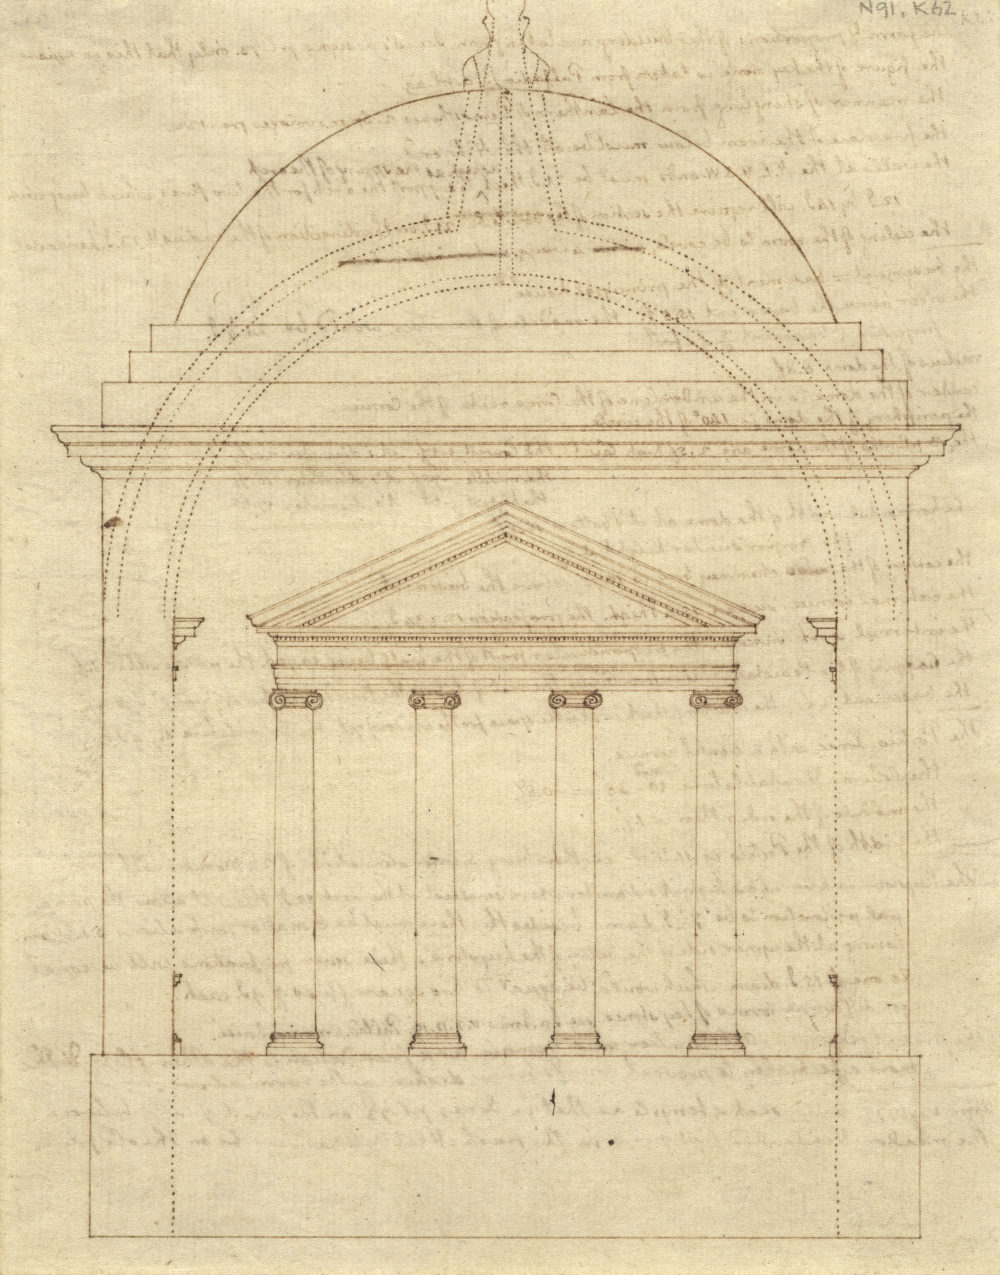 Thomas Jefferson's Monticello iconic portico and dome. (Coolidge Collection of Thomas Jefferson Manuscripts, Massachusetts Historical Society)